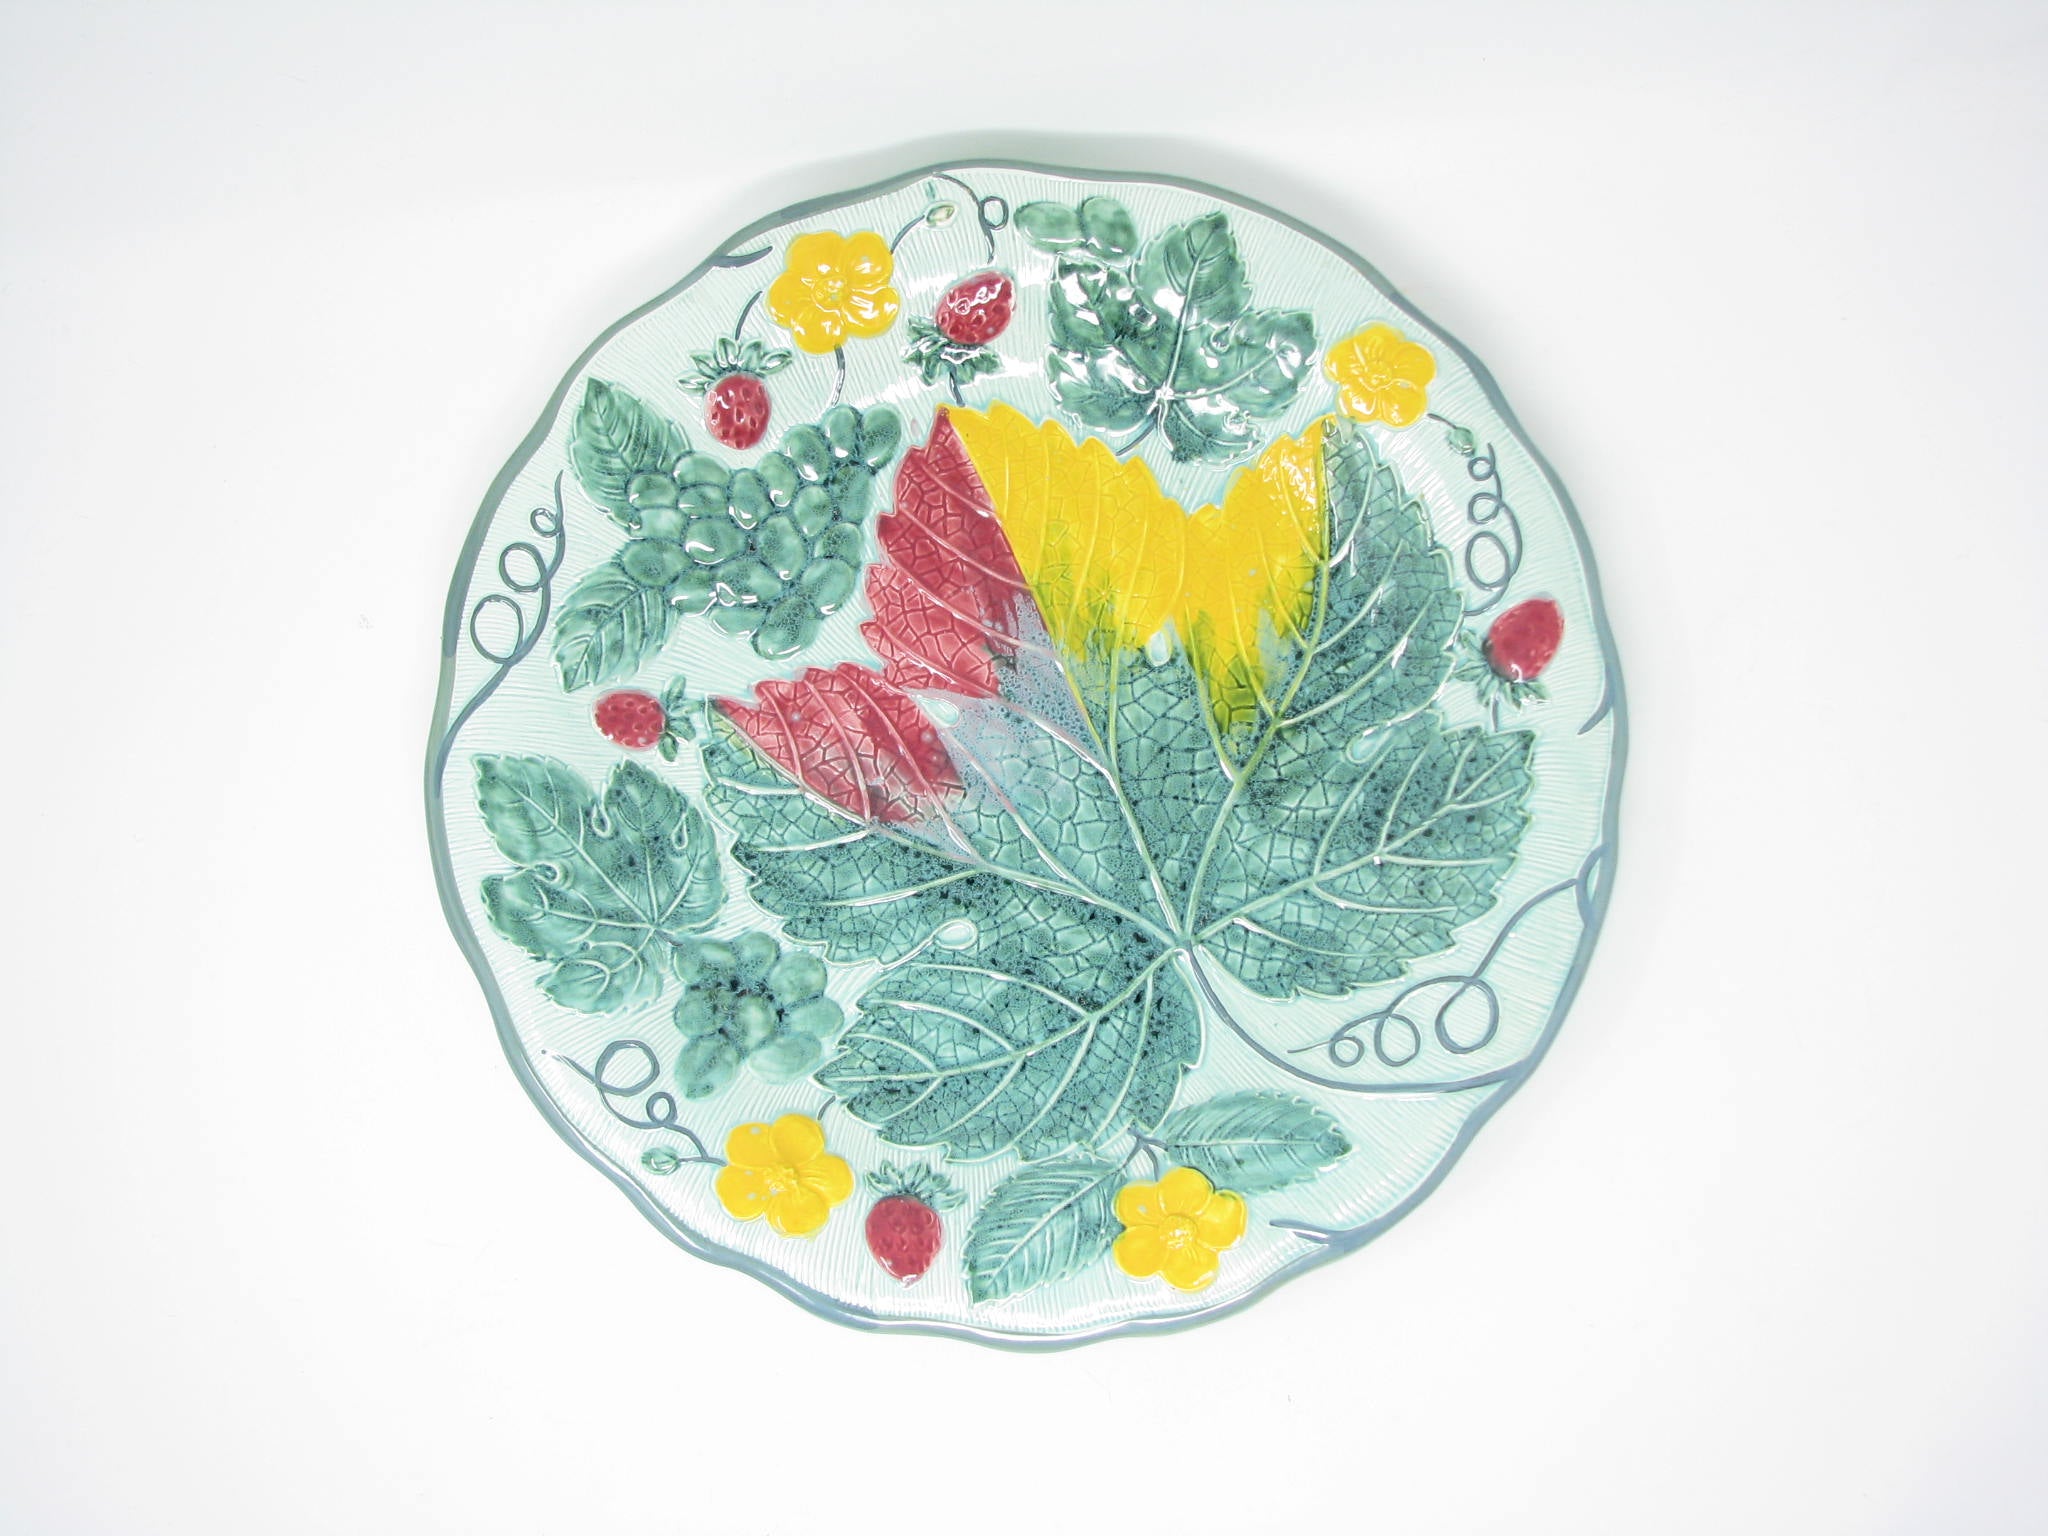 edgebrookhouse - Vintage Georg Schmider Zell Style German Majolica Plate with Grapes, Strawberries & Leaves Design 3778